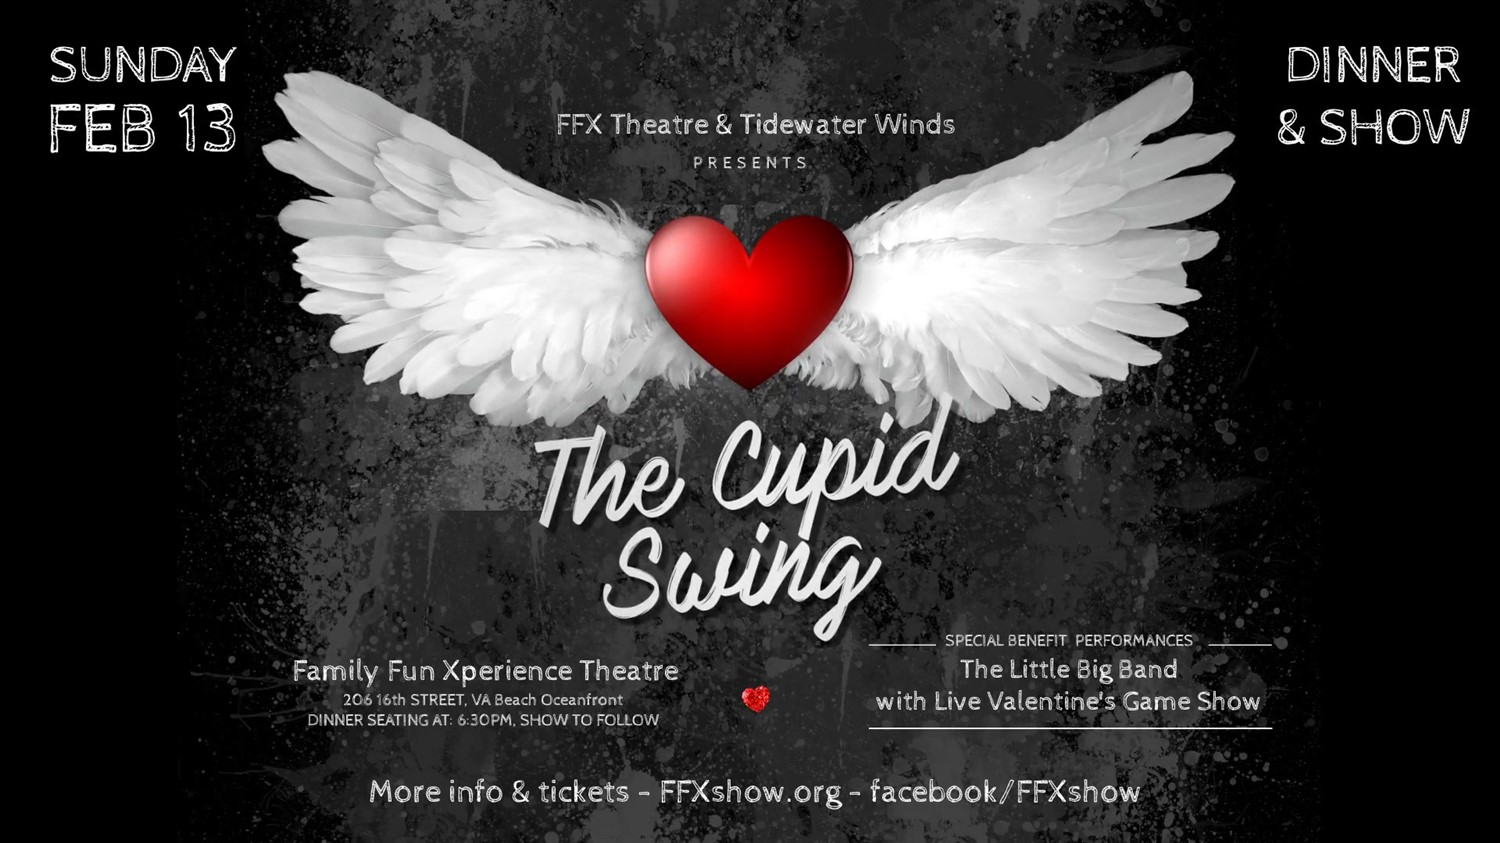 The Cupid Swing Valentine's Dinner Benefit Concert & Game Show on Feb 13, 18:30@FFX Theatre - Buy tickets and Get information on Family Fun Xperience tickets.ffxshow.org